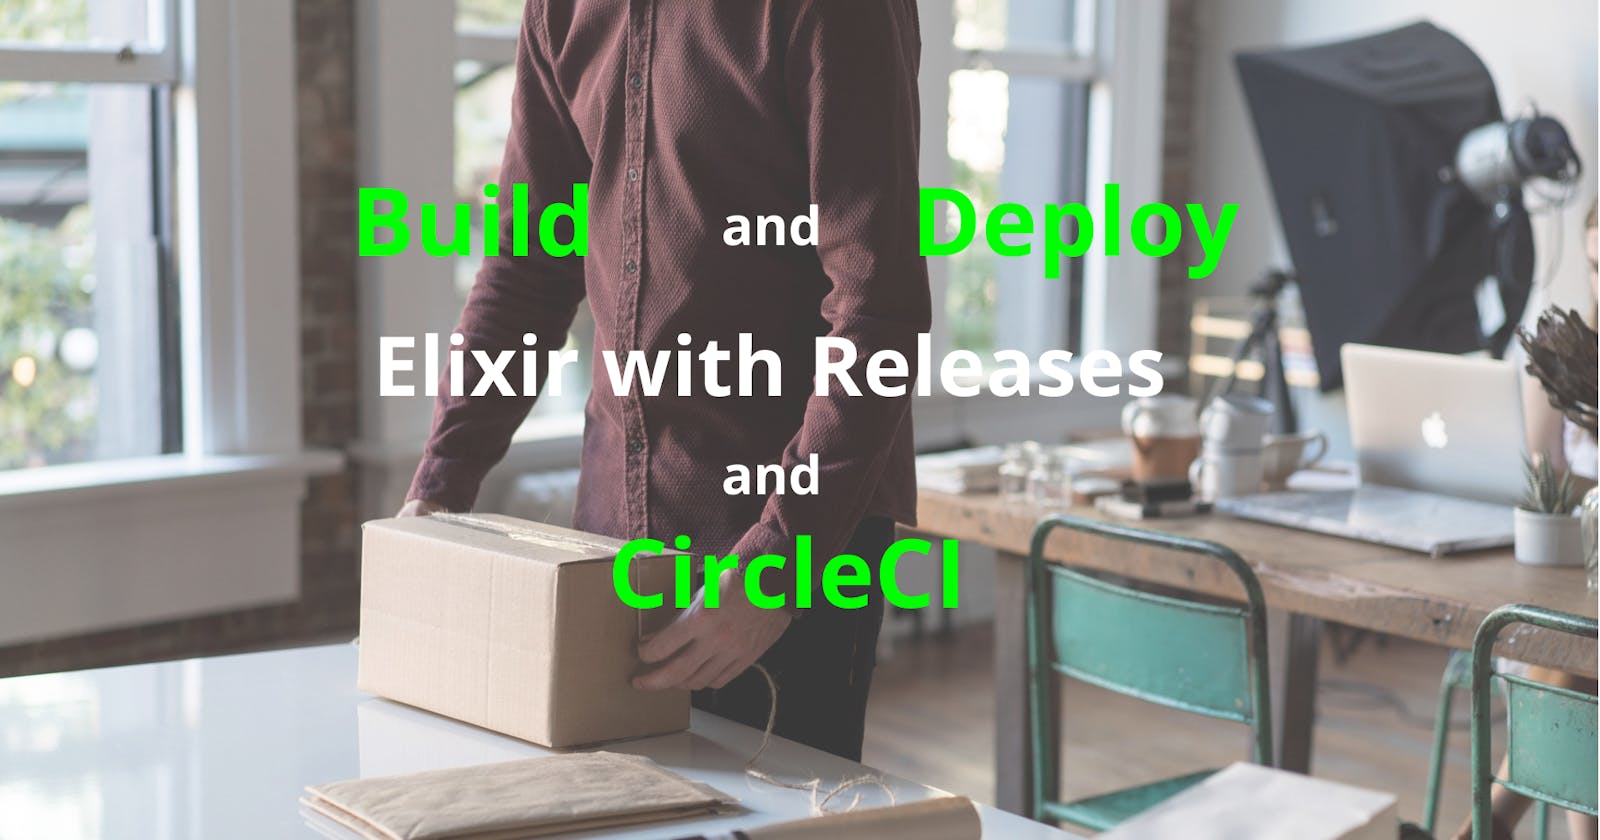 Build and Deploy Elixir App with Releases and CircleCI